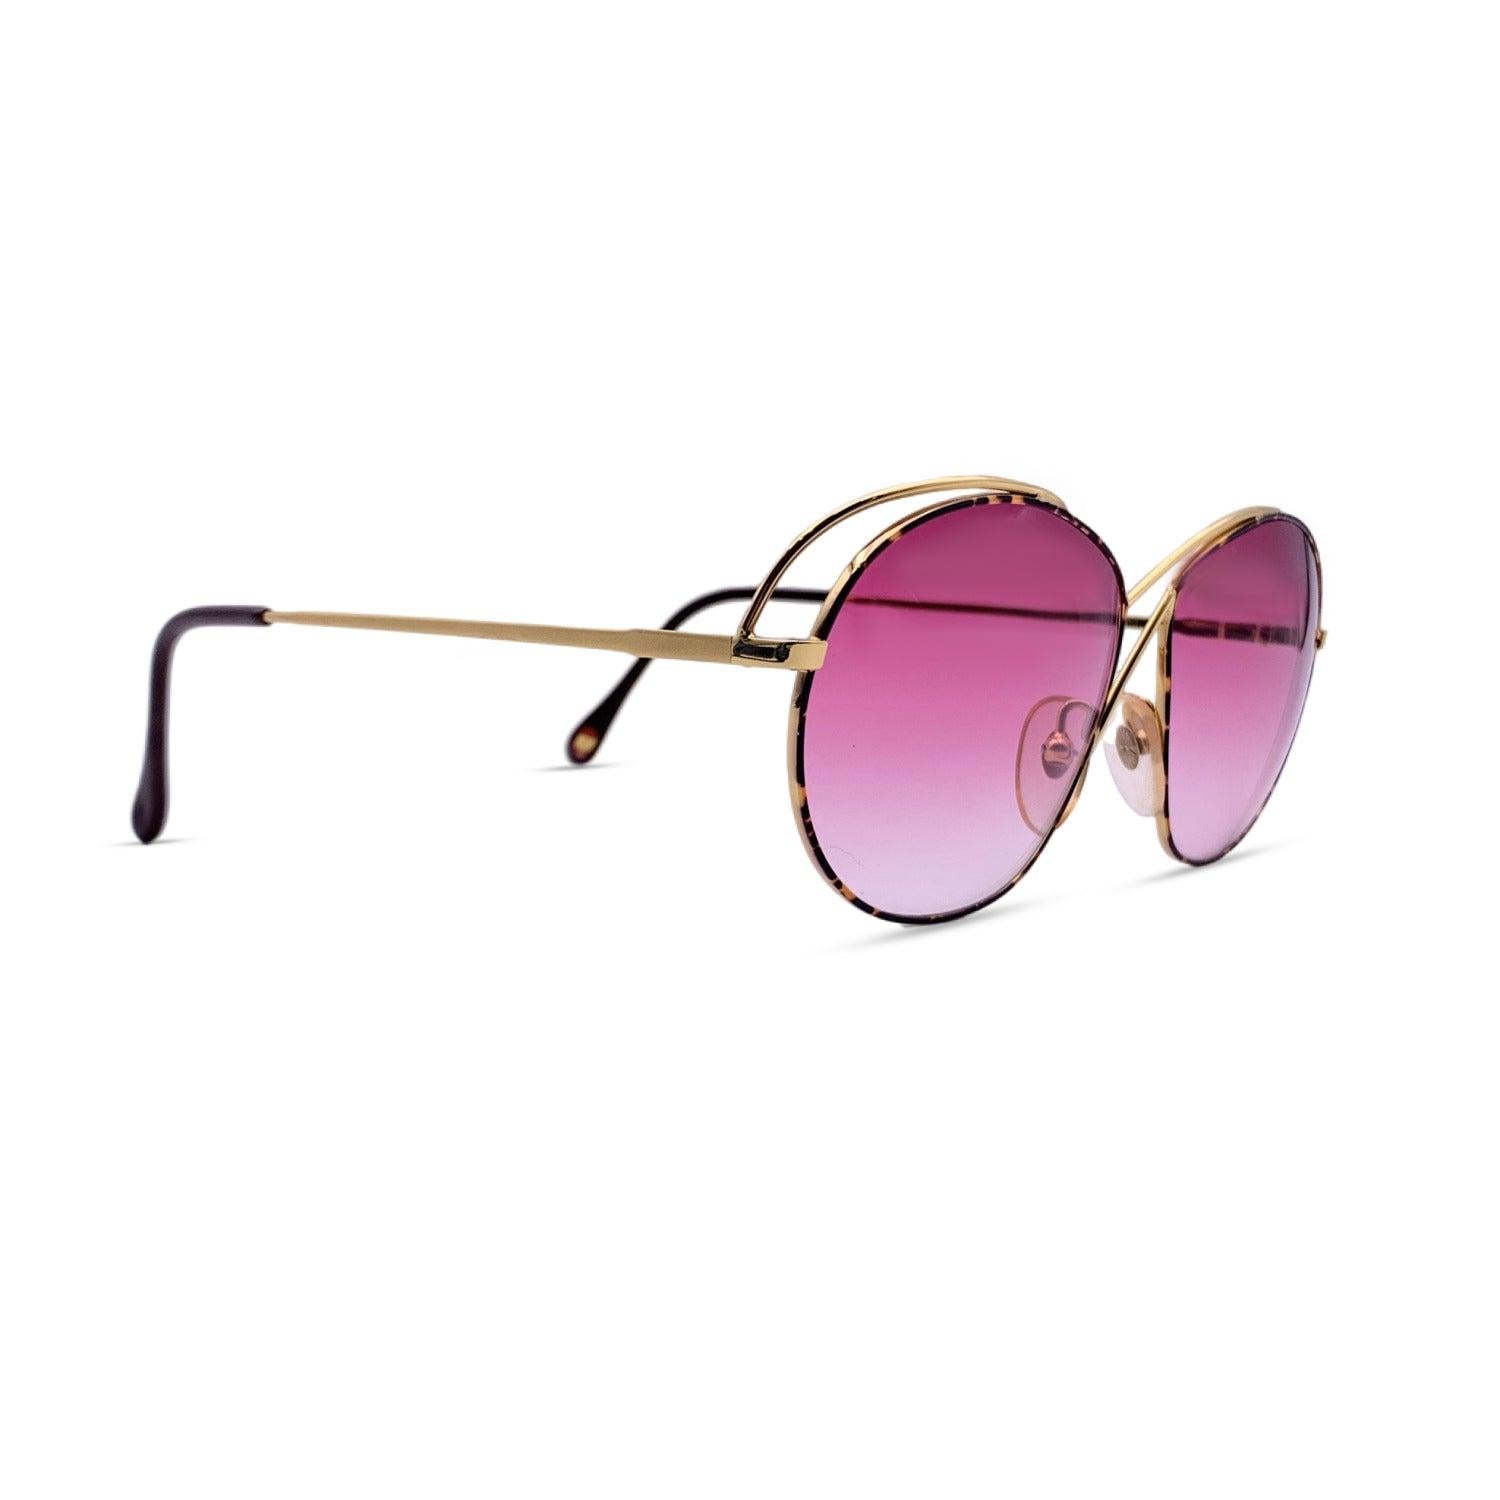 Casanova Vintage Pink Gold Plated Sunglasses C 02 56/20 130mm In Excellent Condition For Sale In Rome, Rome